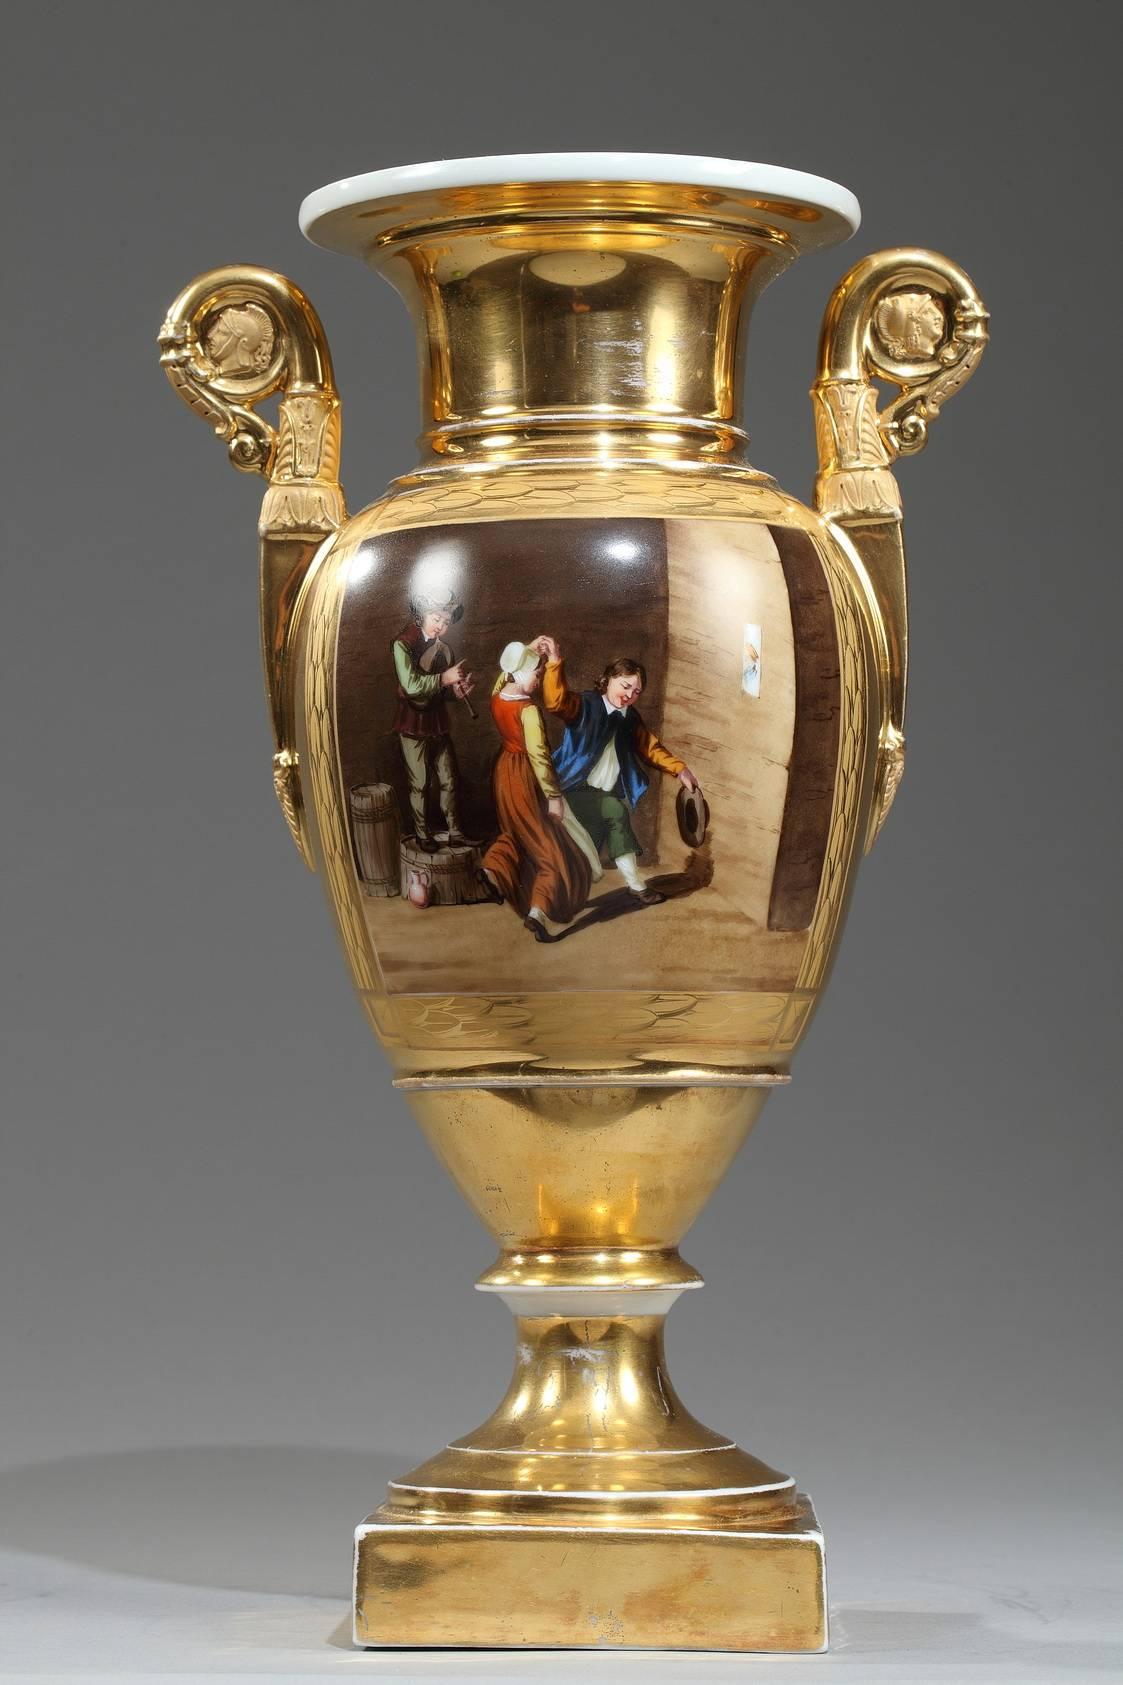 Early 19th century porcelain baluster-shaped vases set upon a high foot and a square base. Each vase has two gold tones and polychromatic decoration of interiors scenes with women and men playing, drinking and dancing. Scrolling handles decorated